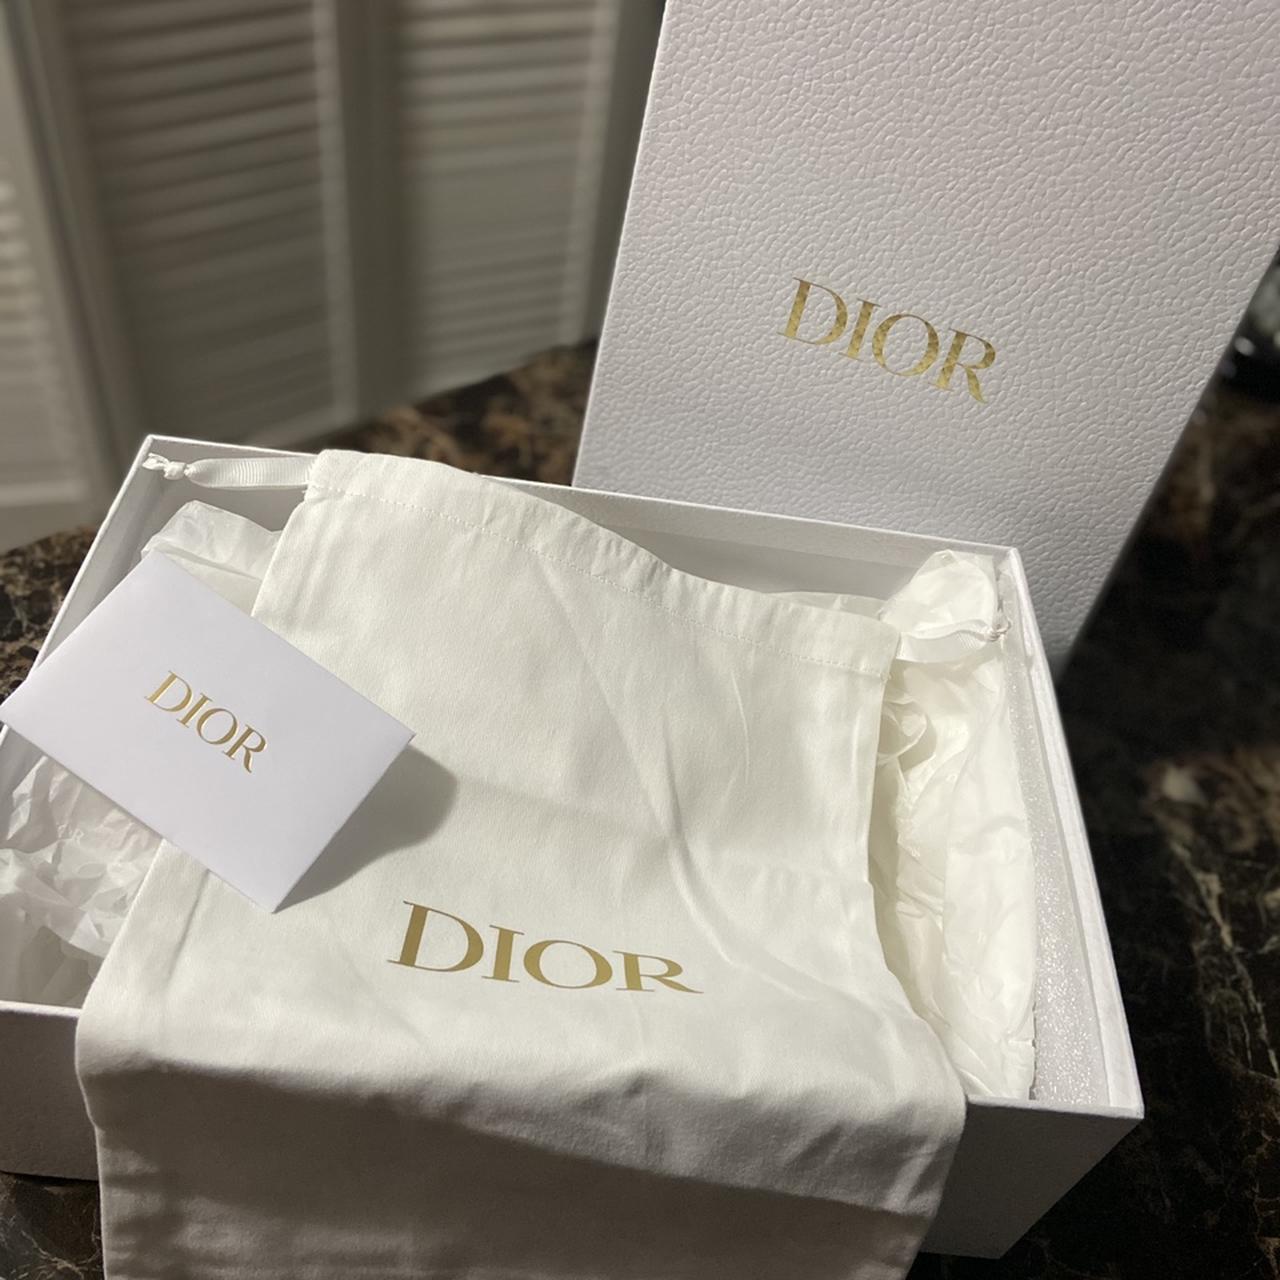 Christian Dior shoe box!! New! Not tampered! Bought